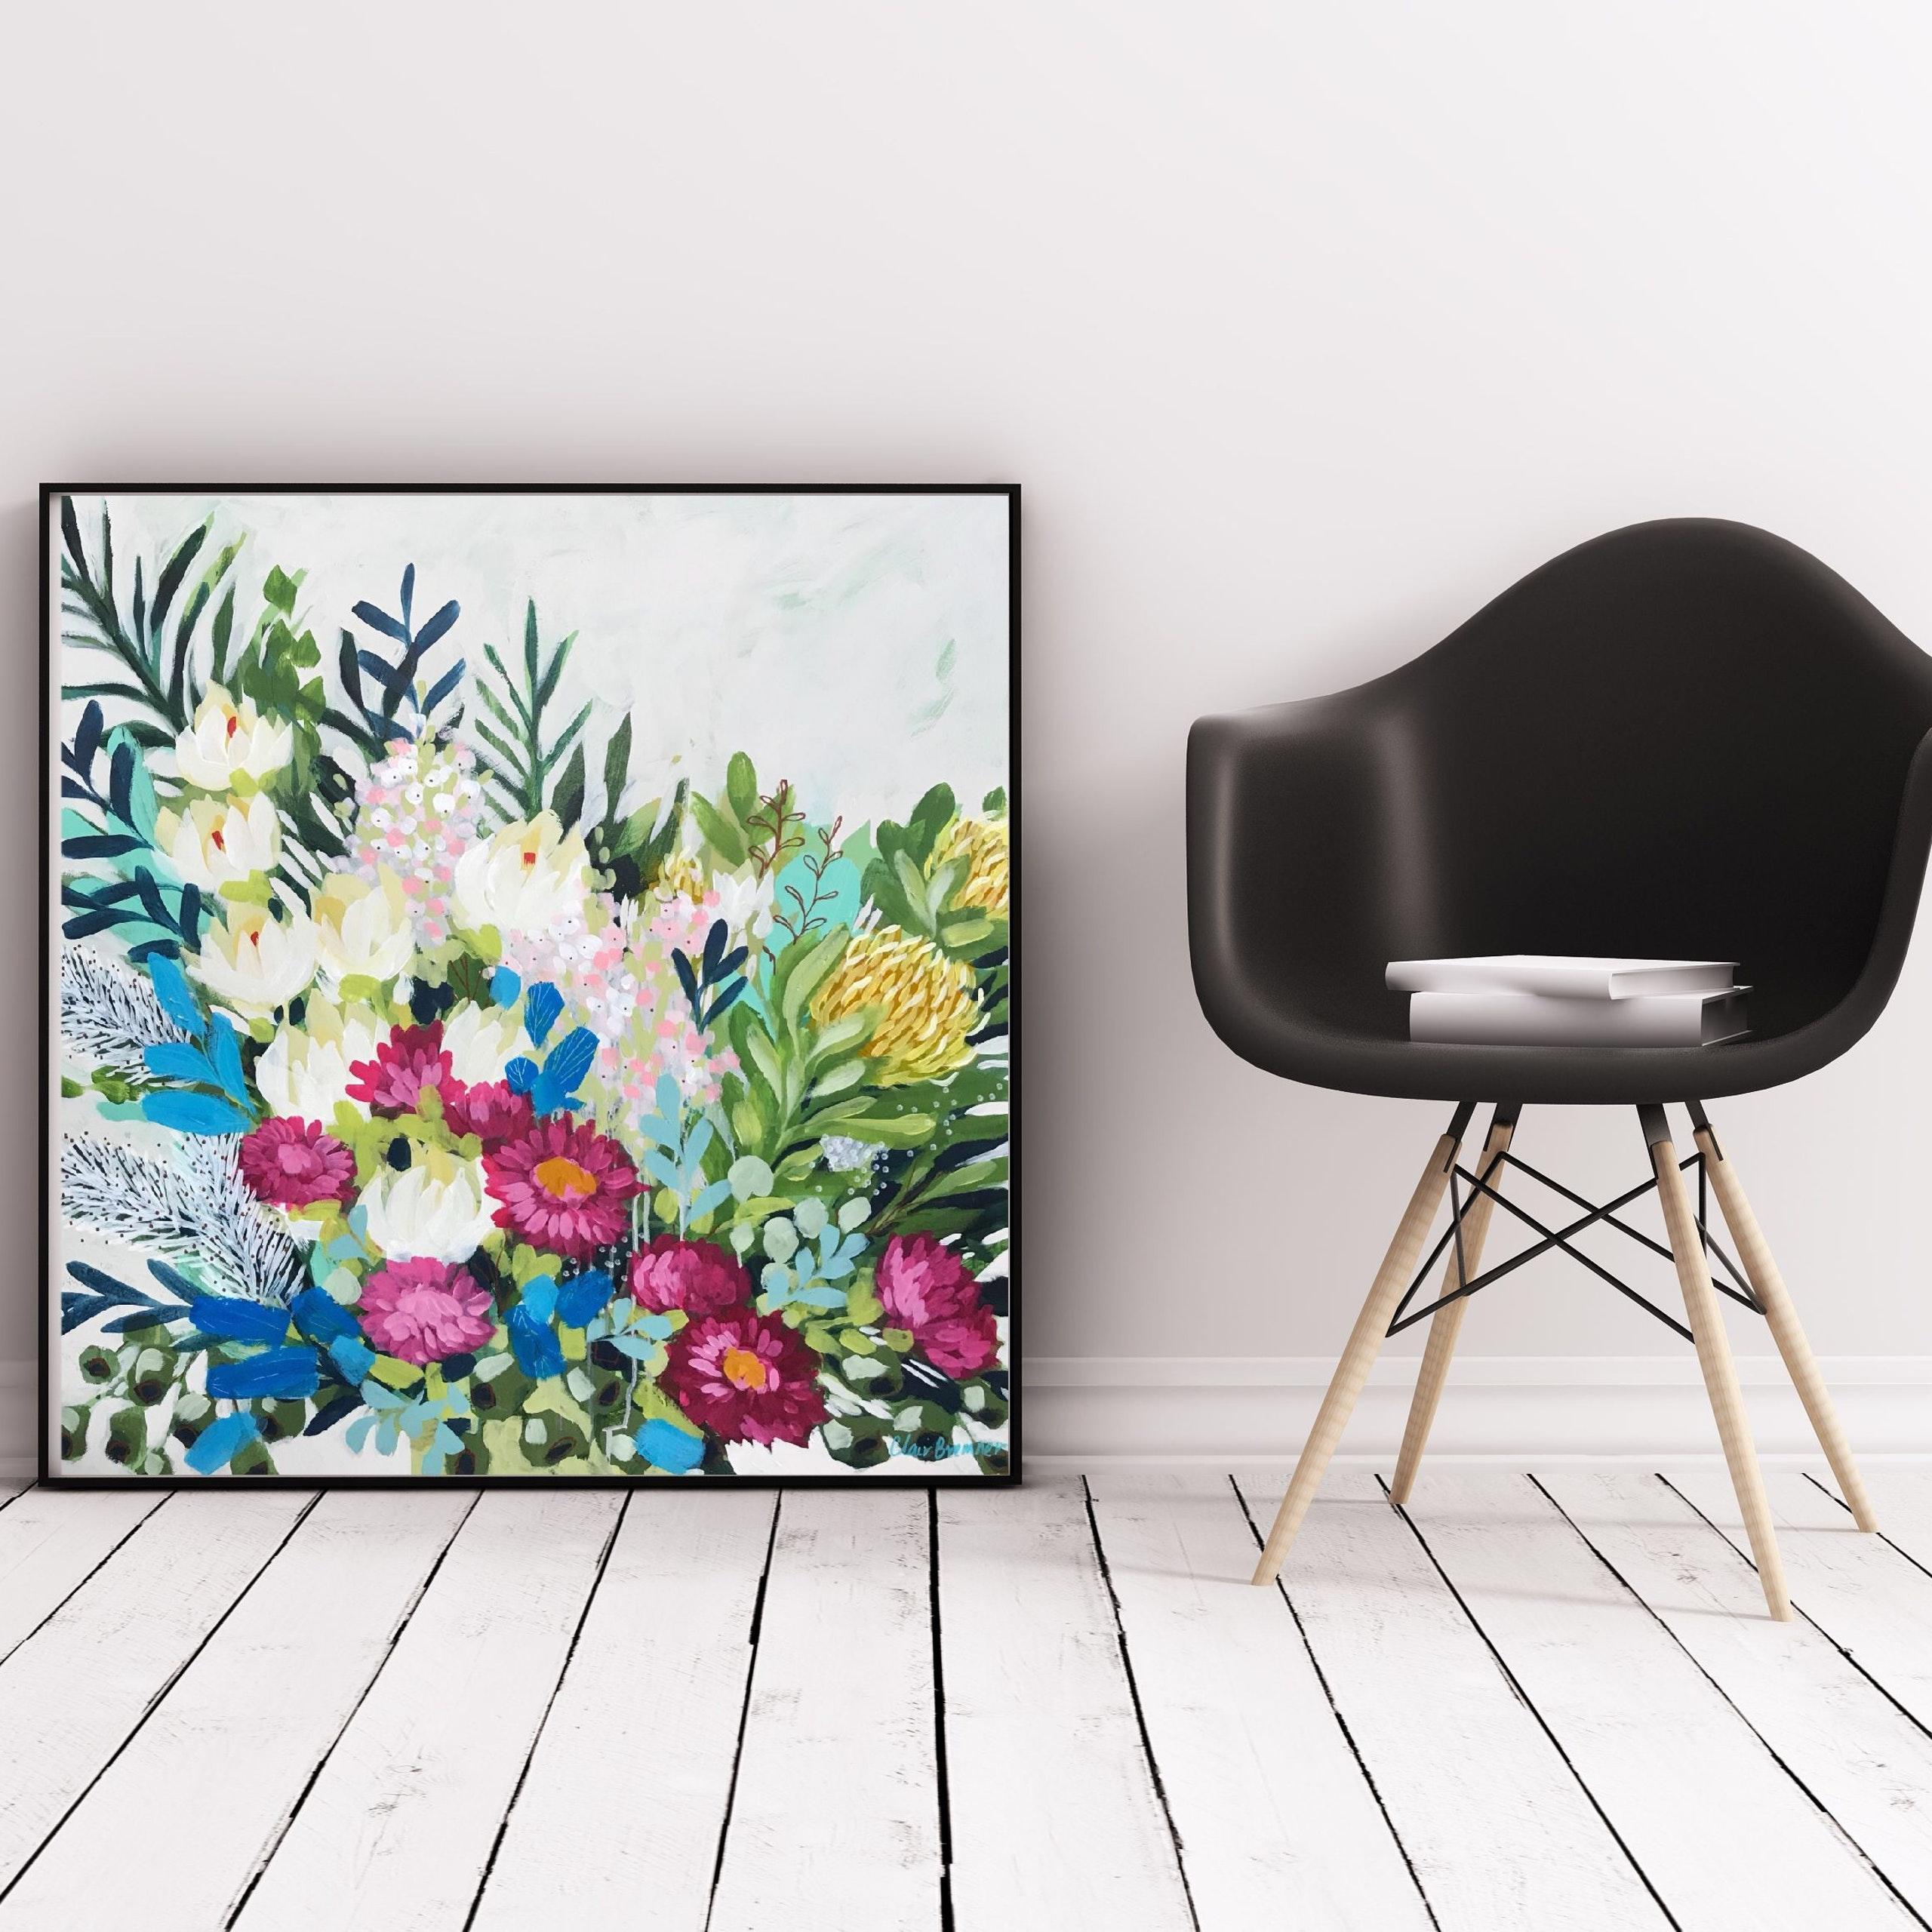 Paper Daisies and Protea 2 by Clair Bremner. Acrylic on canvas. Ready to hang. 1